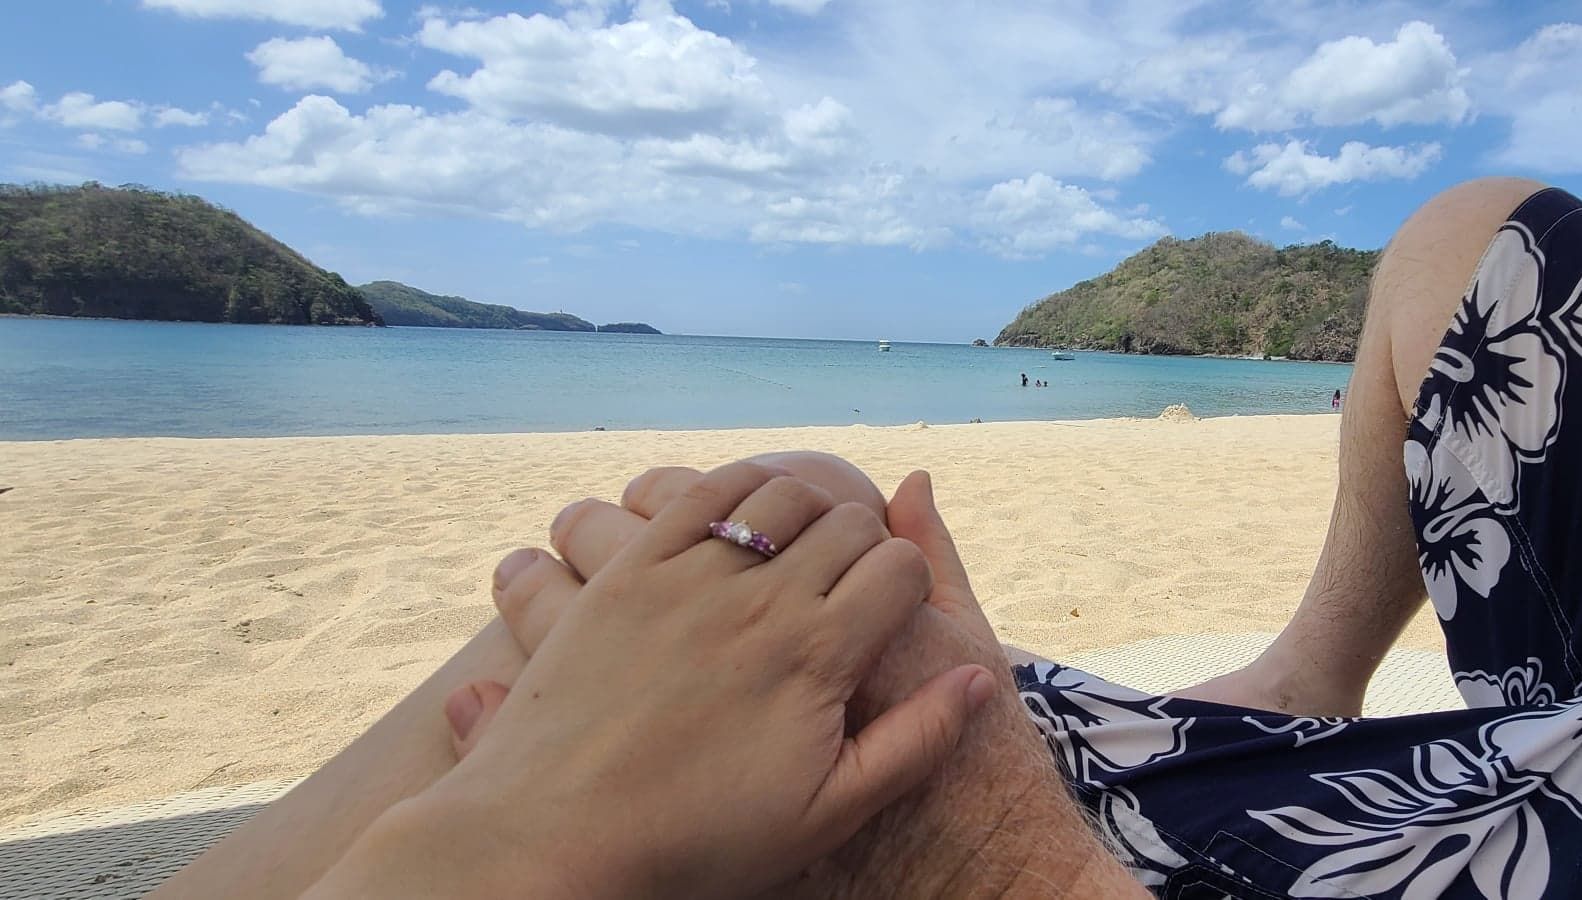 Newly engaged Christians hold hands on a beautiful beach